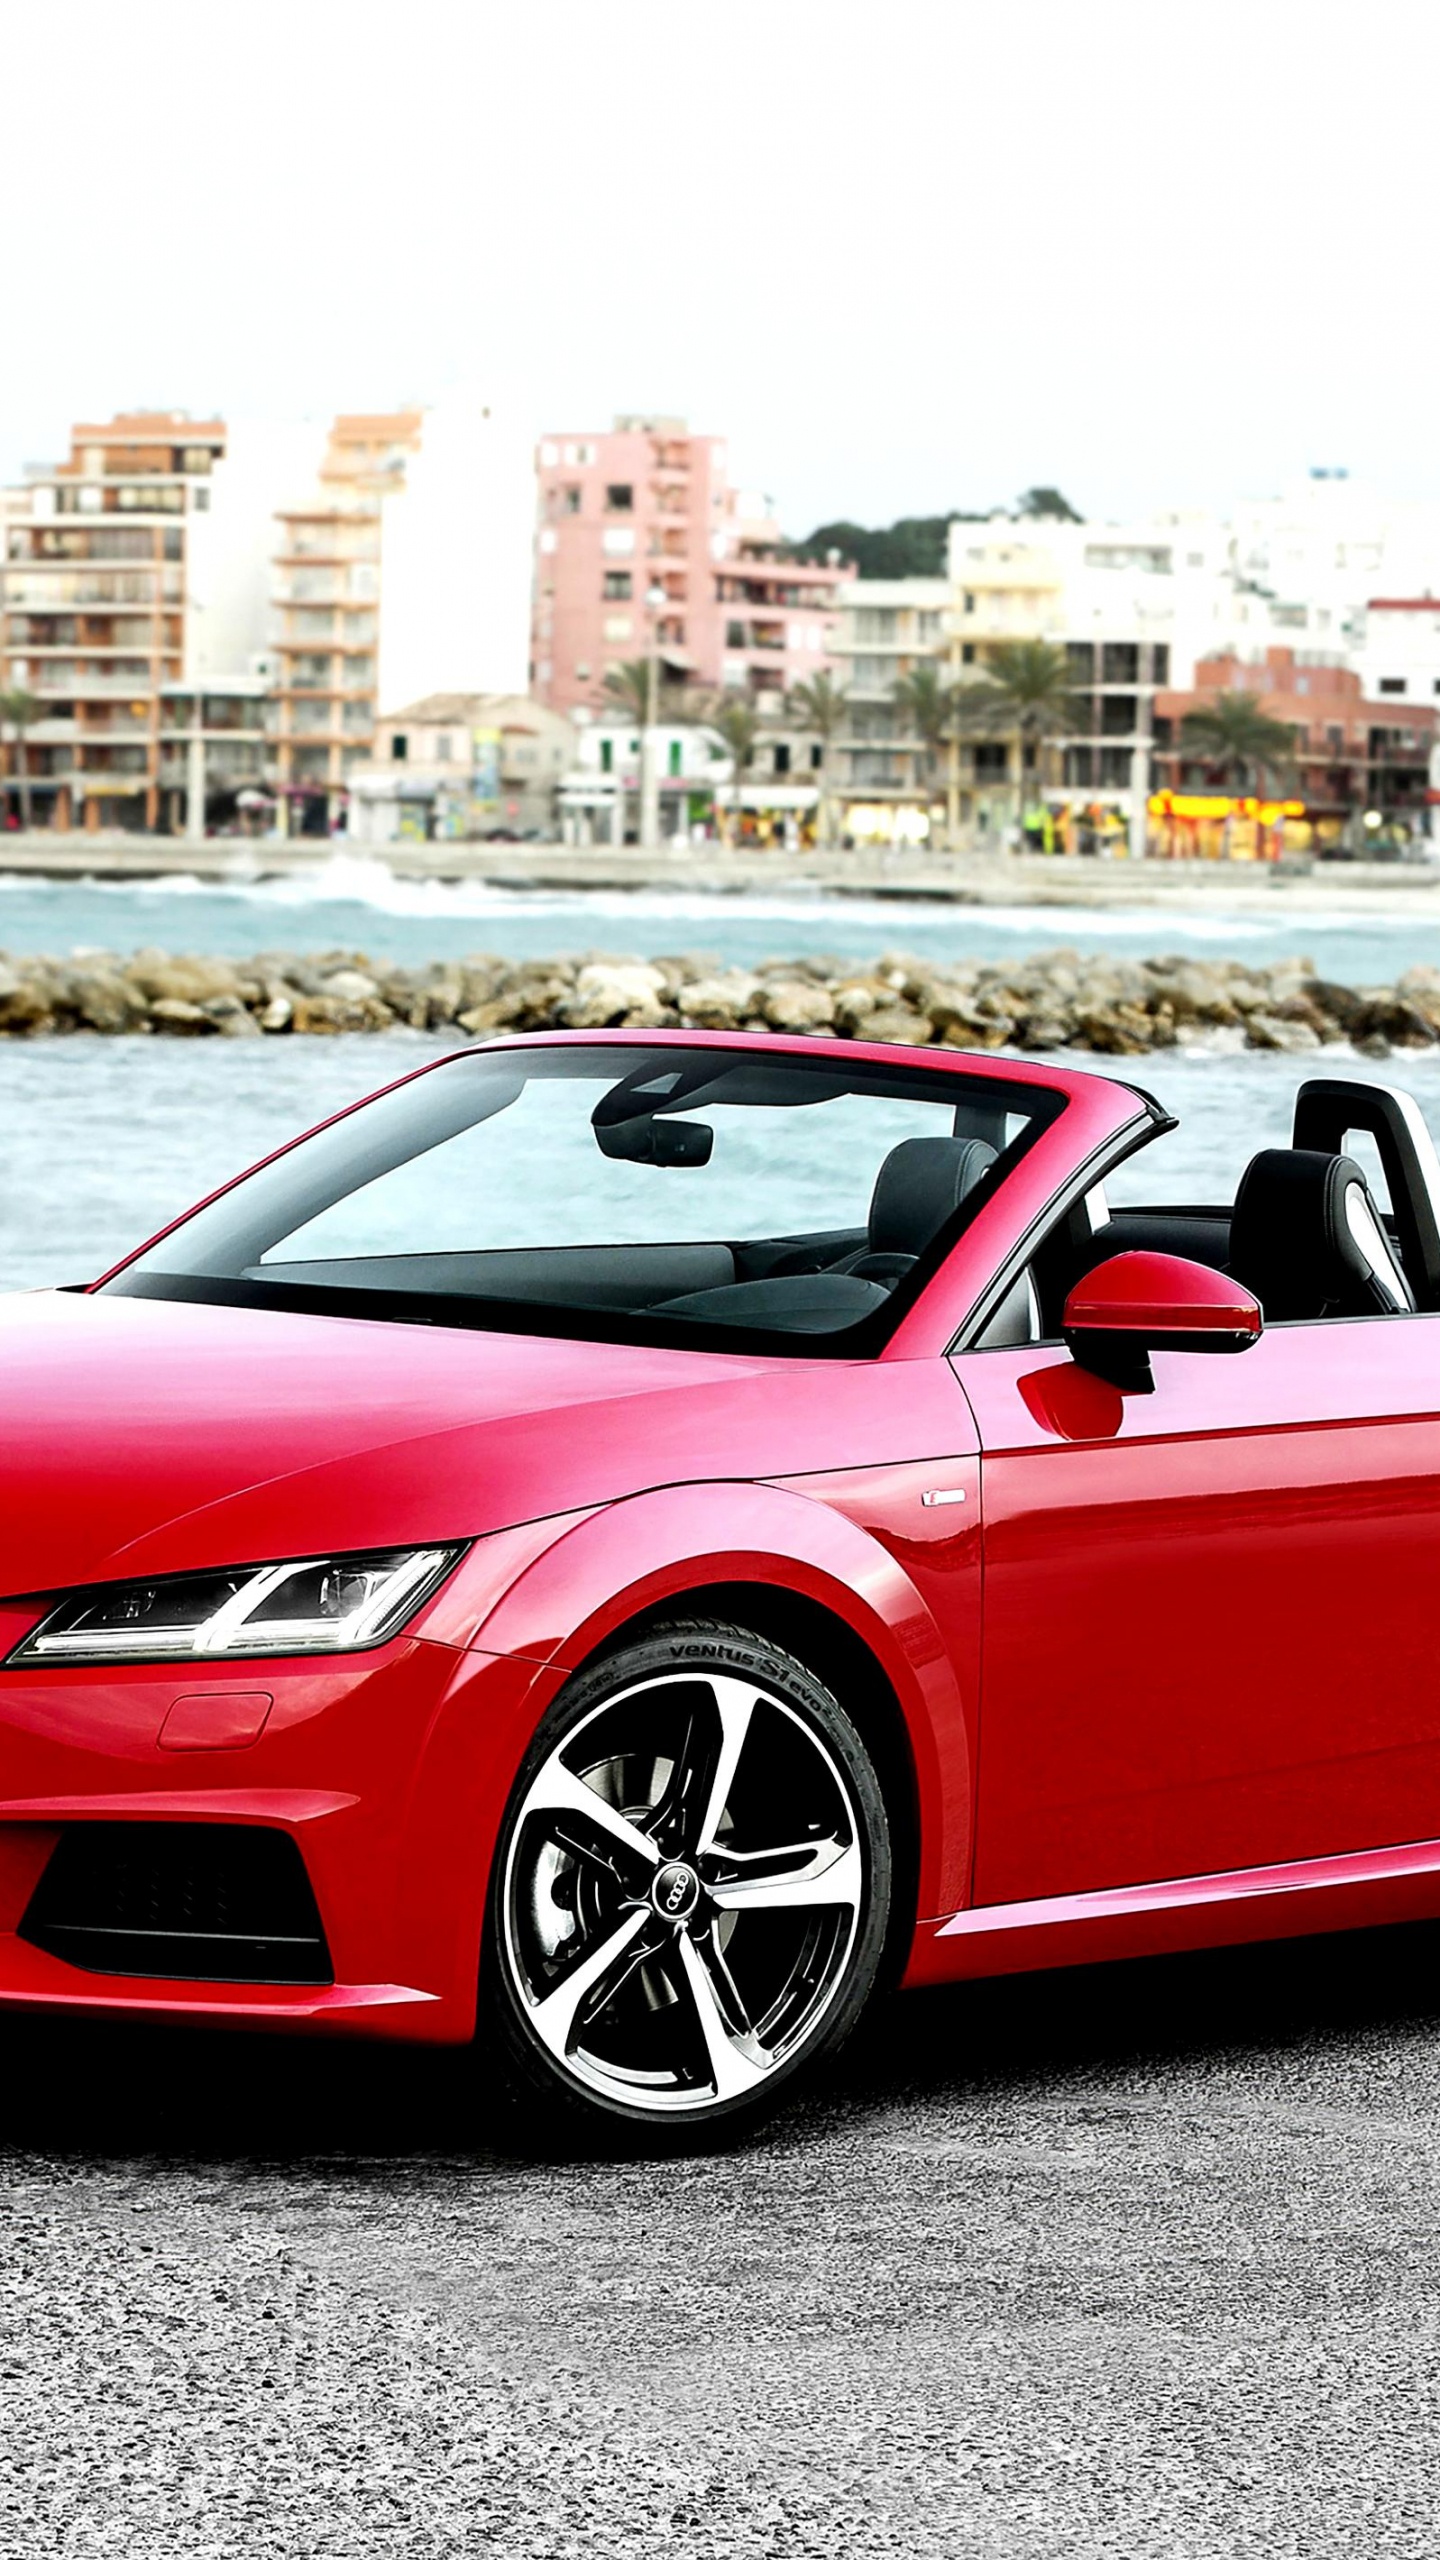 Red Convertible Car Parked Near Body of Water During Daytime. Wallpaper in 1440x2560 Resolution